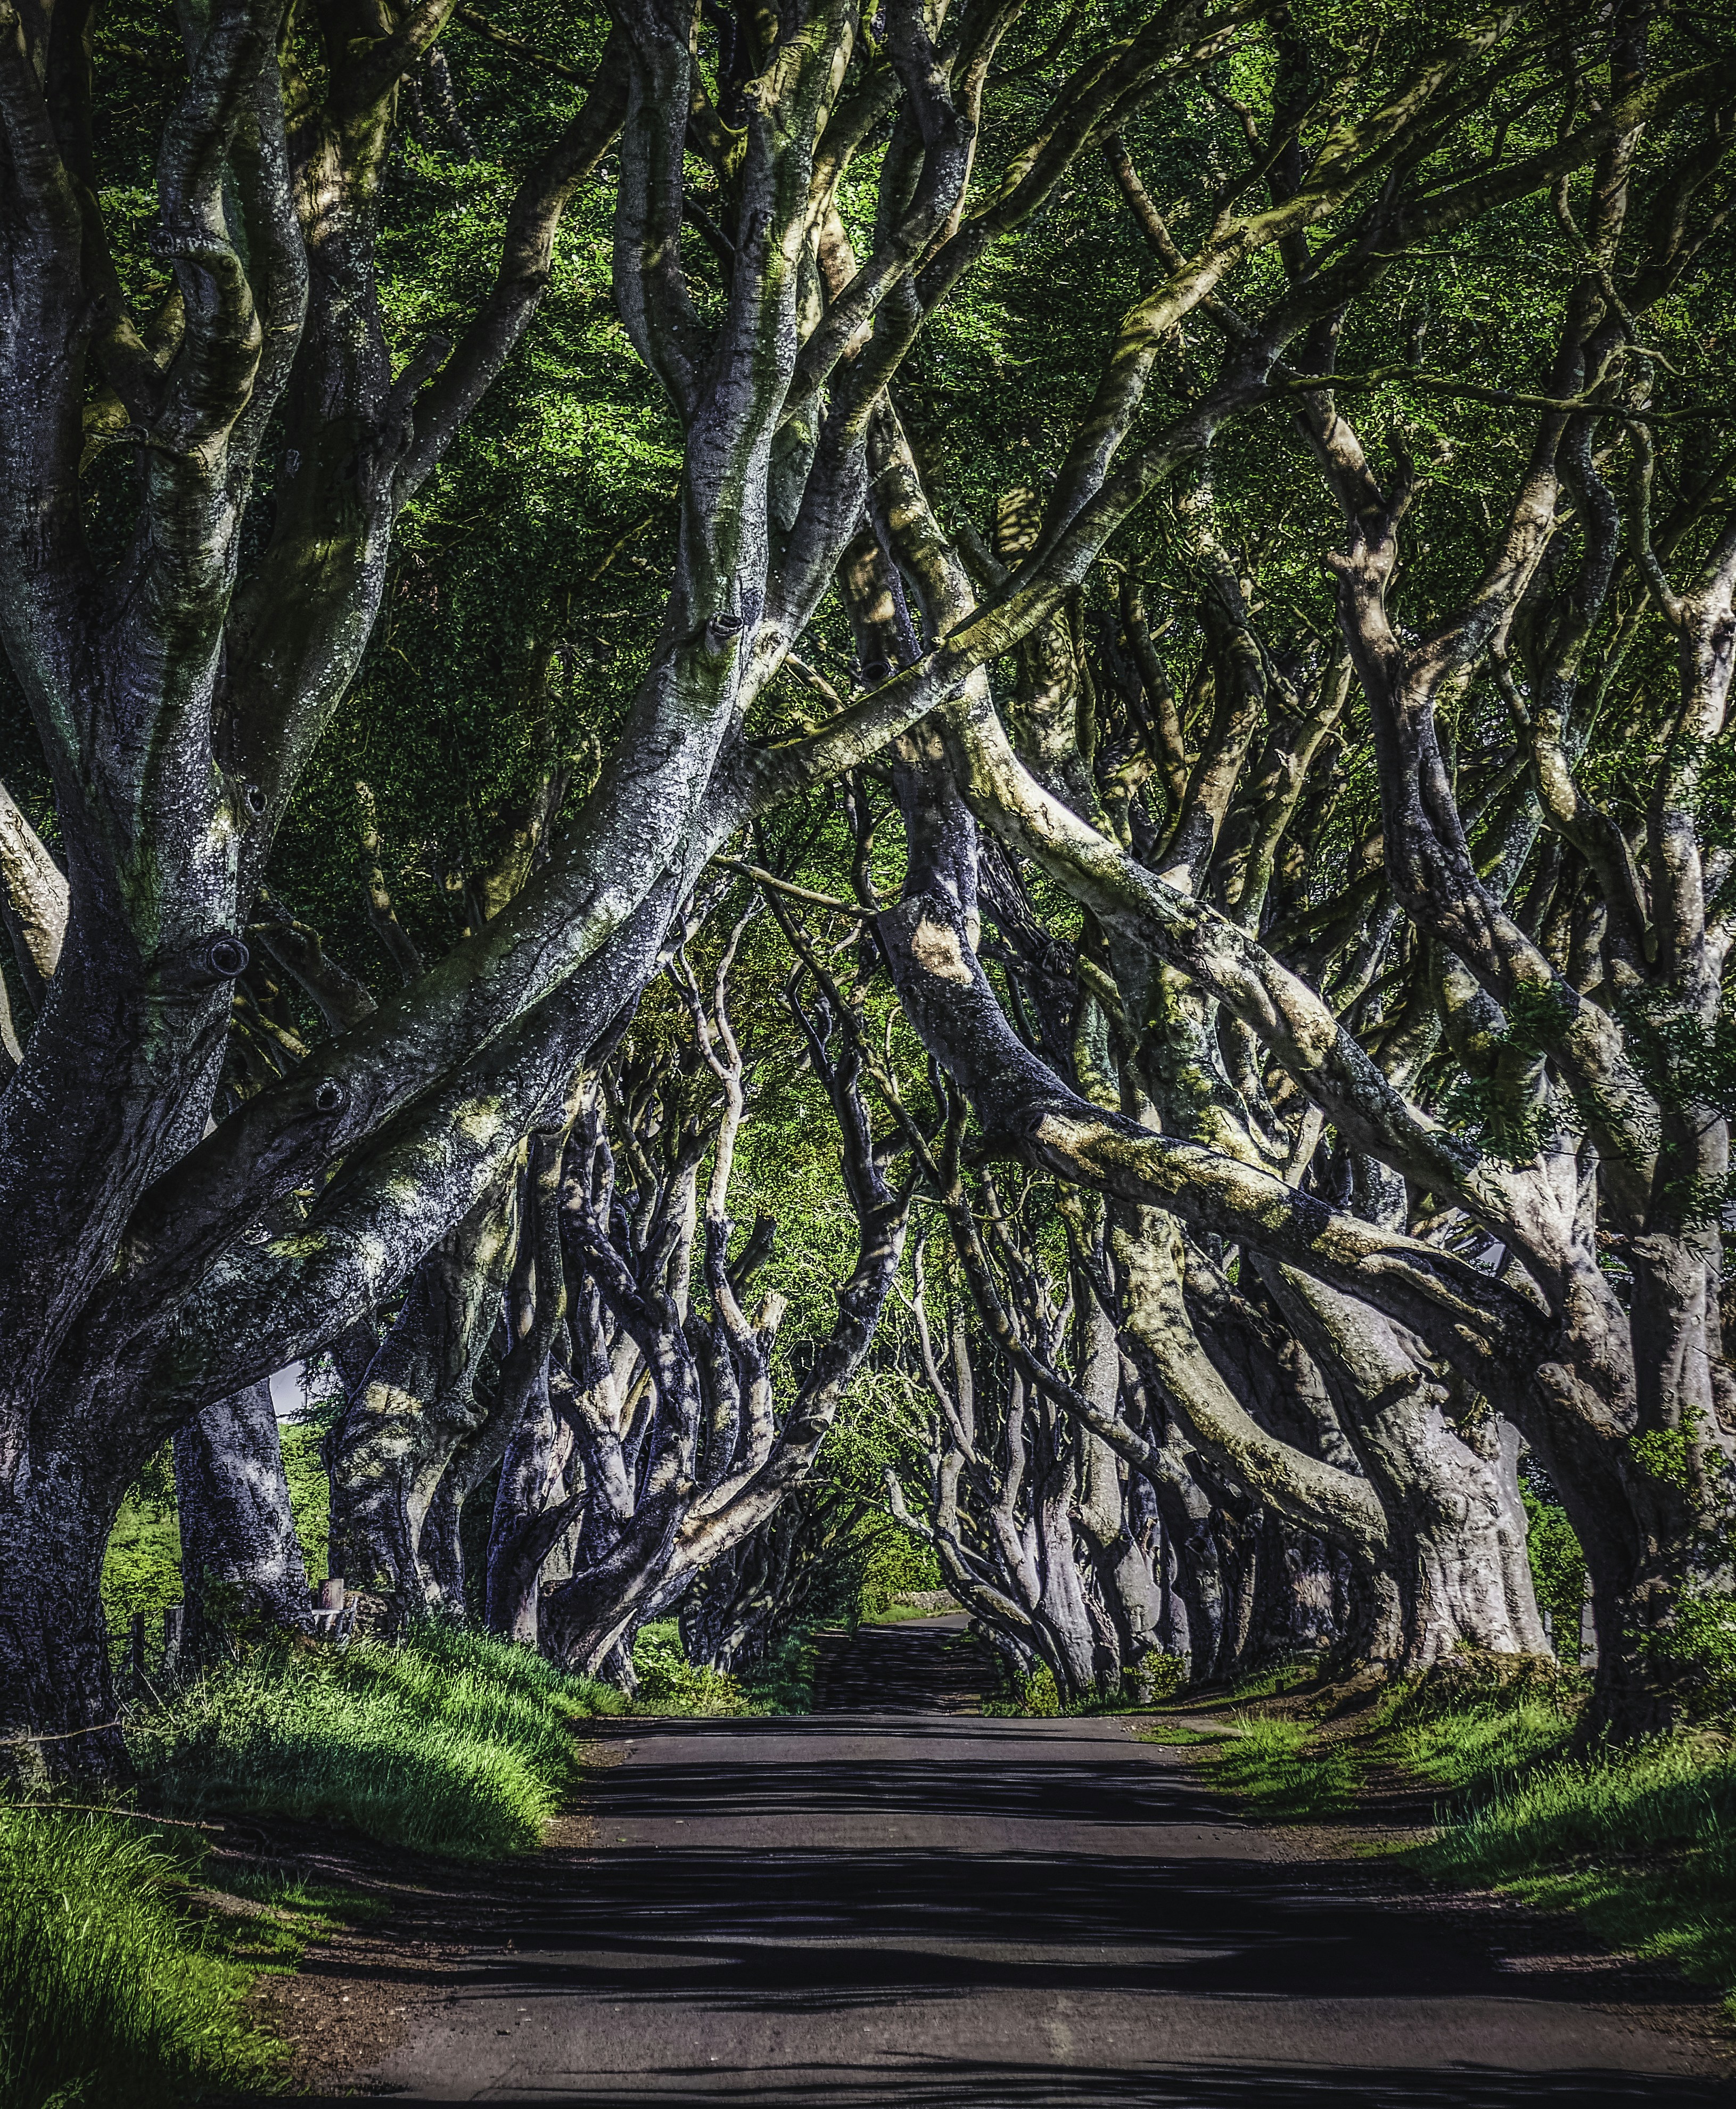 The Dark Hedges, famous as the King's Road from Game of Thrones, and also appearing in the movie, Transformers: The Last Knight (Jun., 2020).